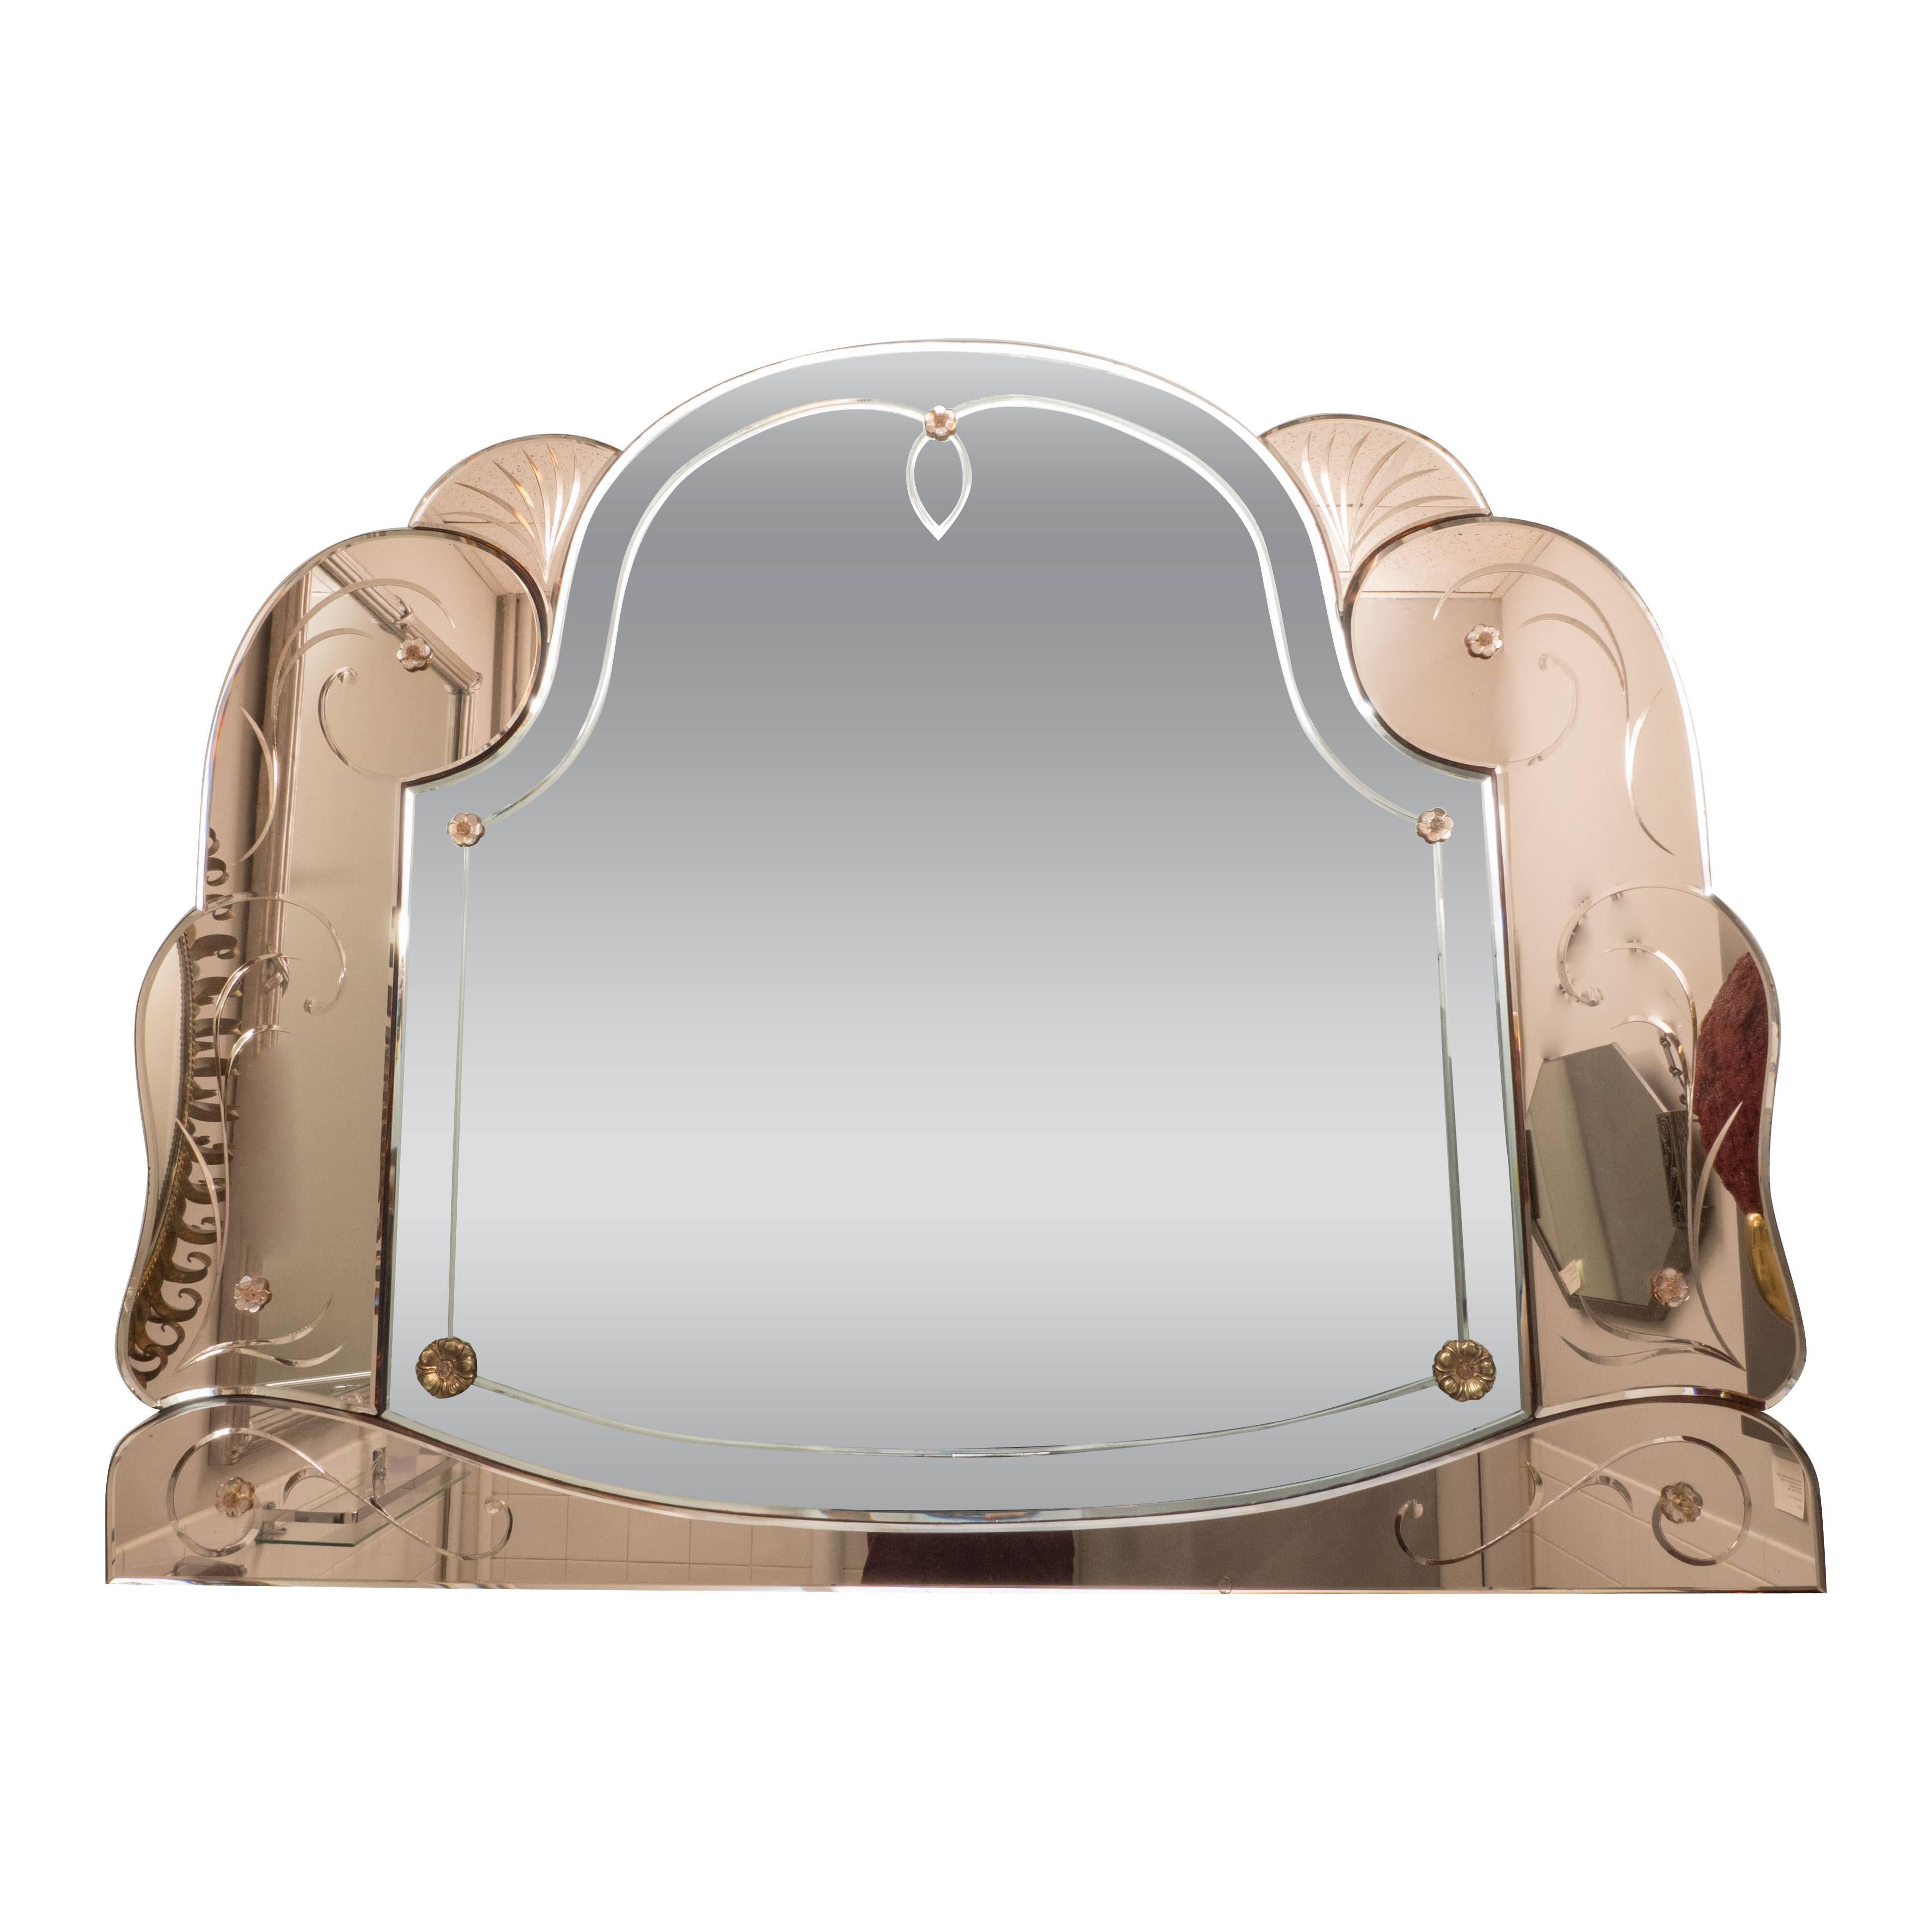 Magnificent Art Deco Rose Gold and Silver Mirror with Flora and Fauna Accents